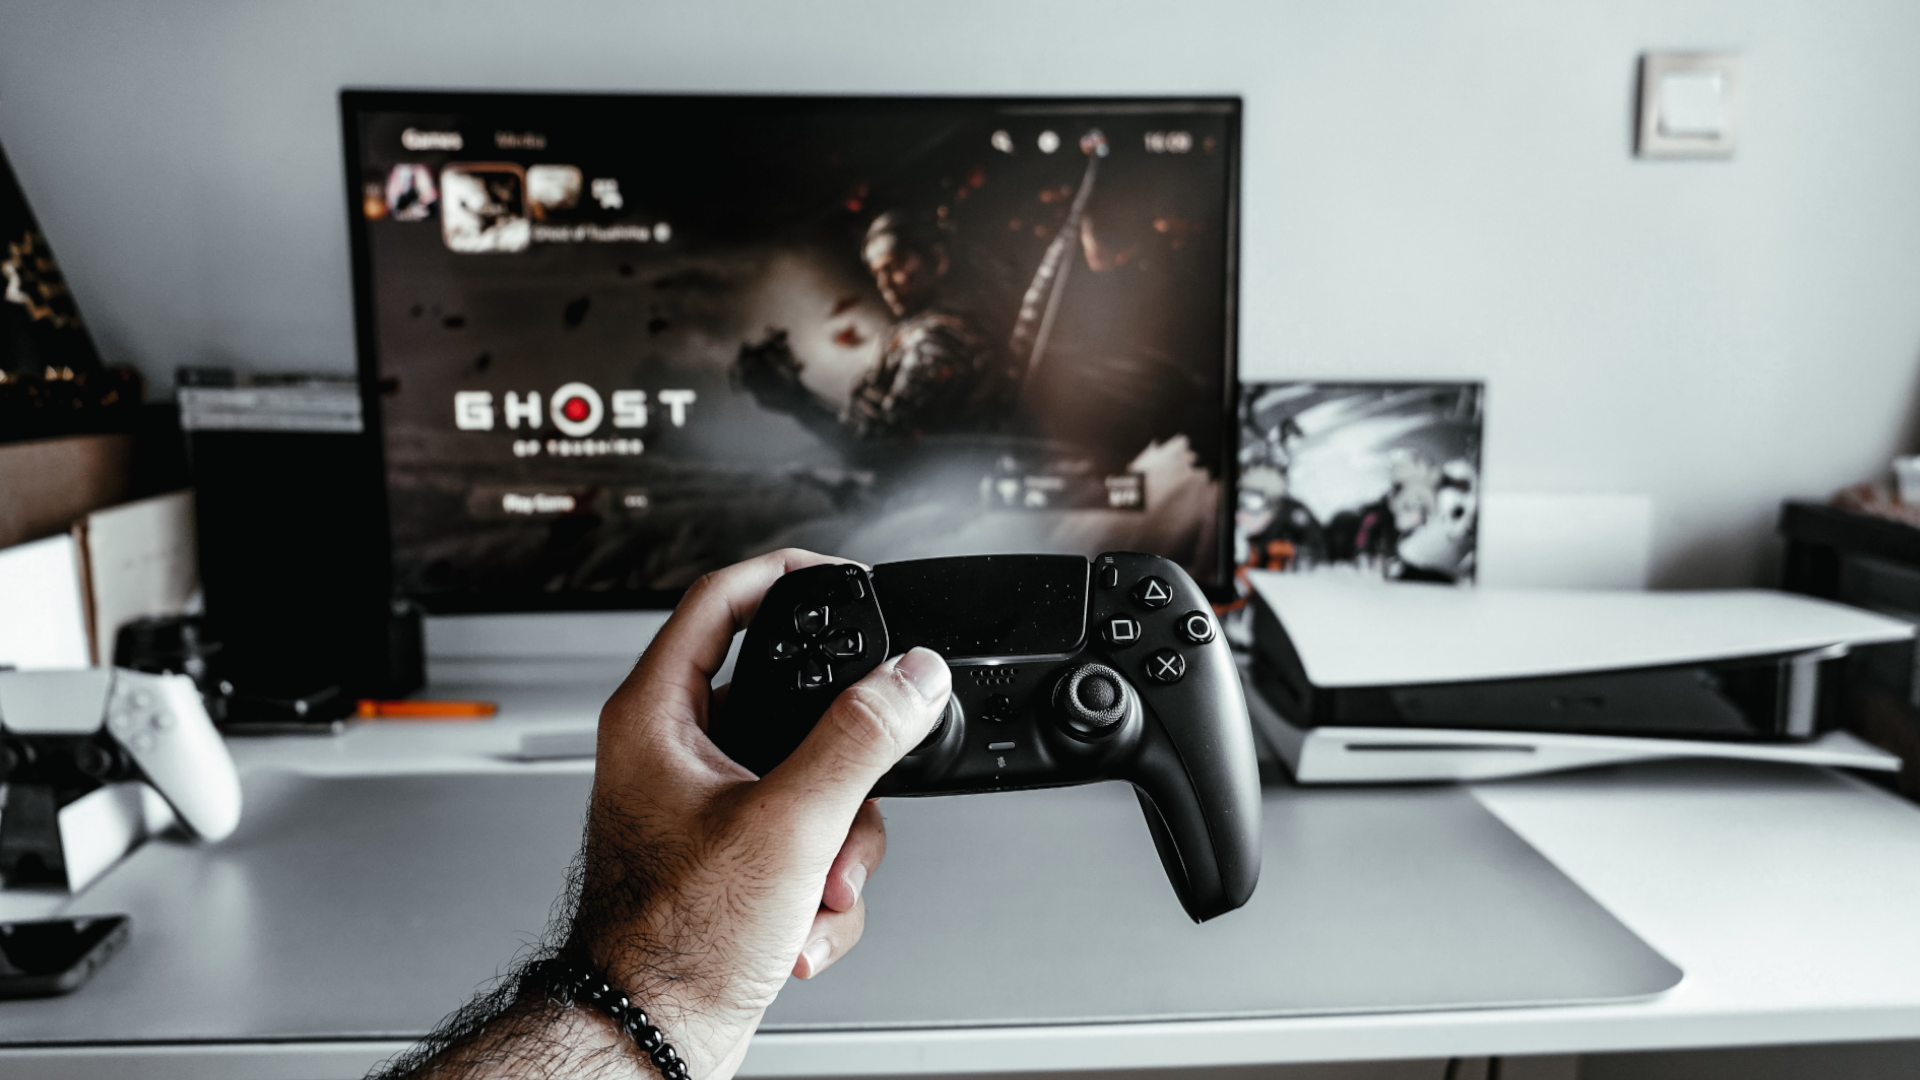 A man's hand holding a black PS5 DualSense controller in front of a TV showing Ghost of Tsushima